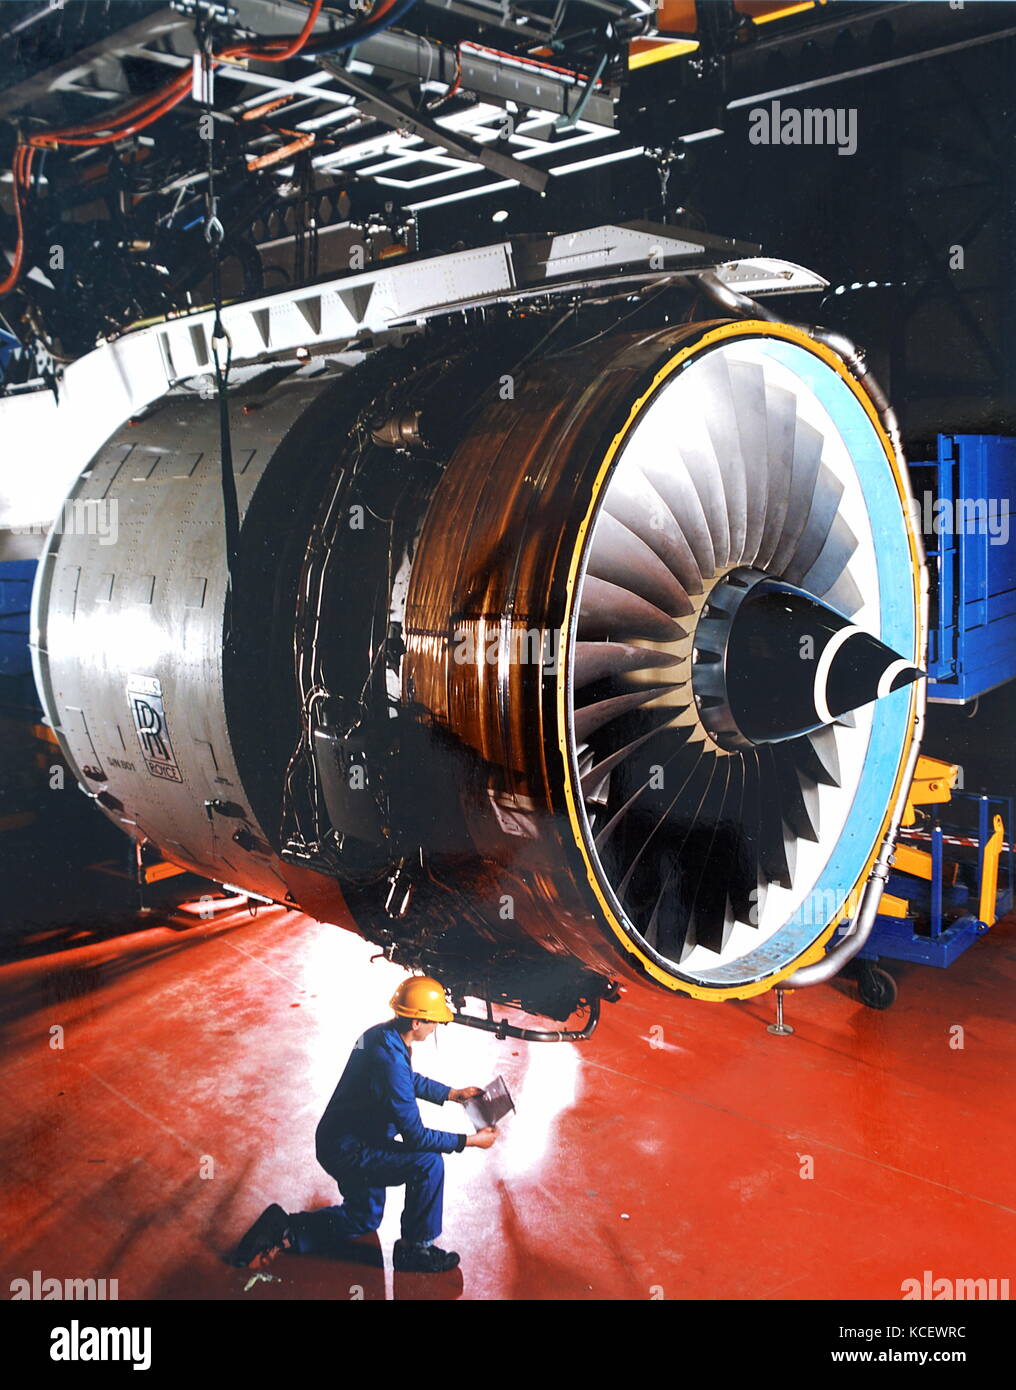 Photograph taken within the assembly plant at Boeing in Wichita. A Trent 800 development engine is mounted to its Boeing 777 strut before being flight cycle and endurance testing at Rolls-Royce. Dated 20th Century Stock Photo